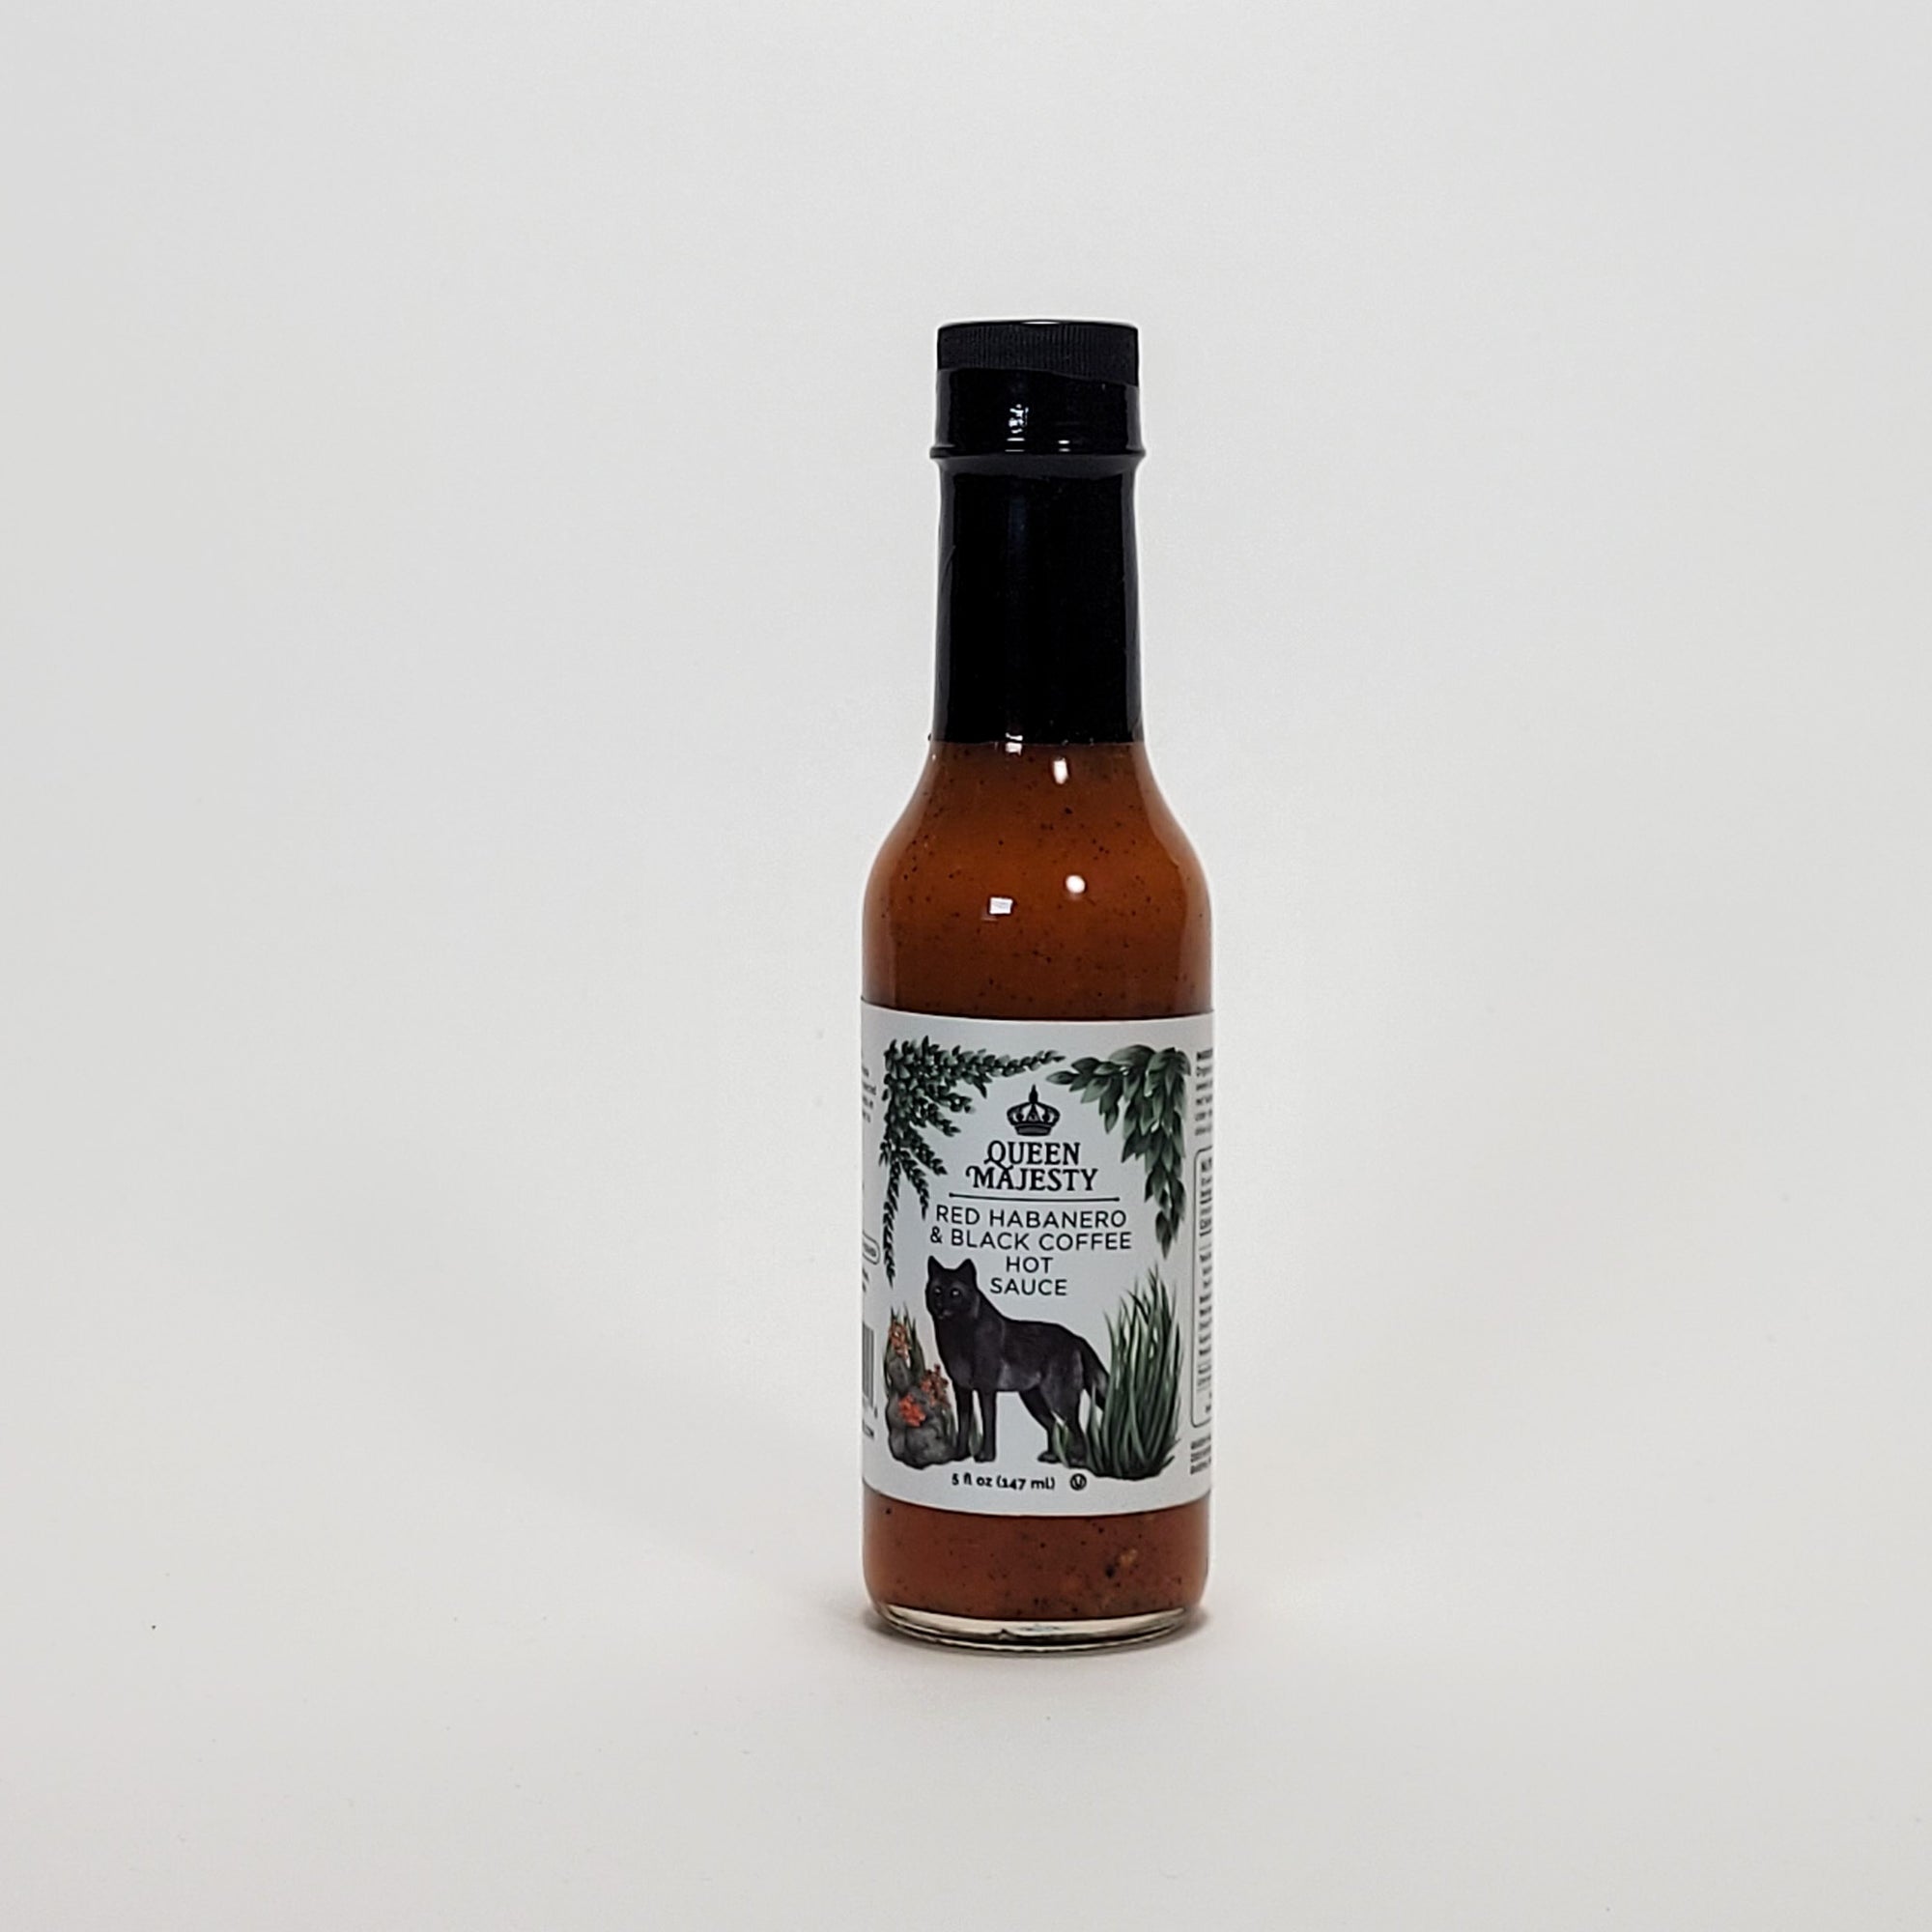 Queen Majesty Red Habanero and Black Coffee hot sauce